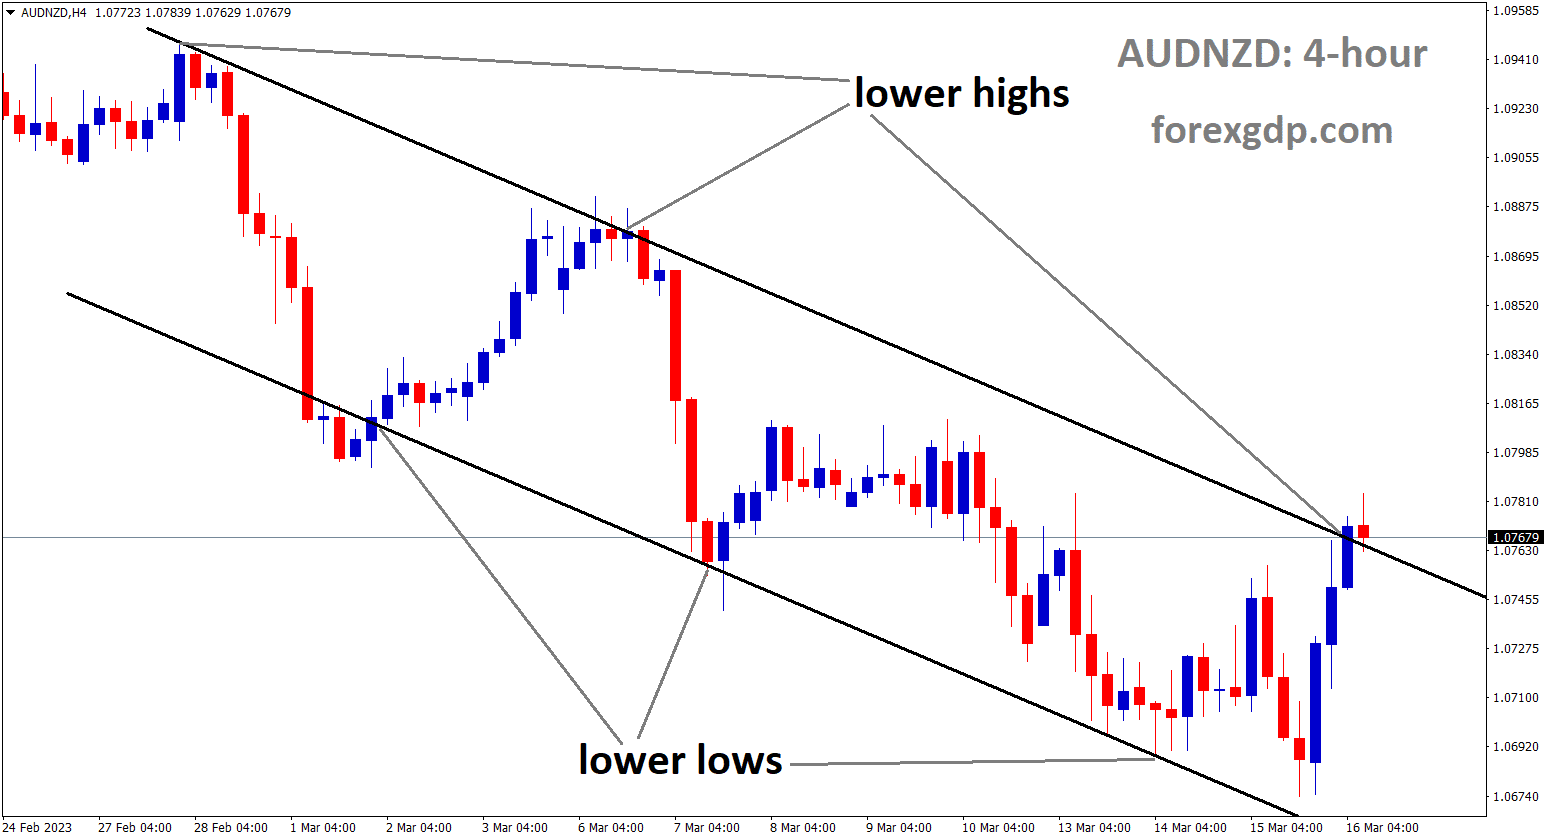 AUDNZD is moving in Descending channel and the market has reached the lower high area of the channel.